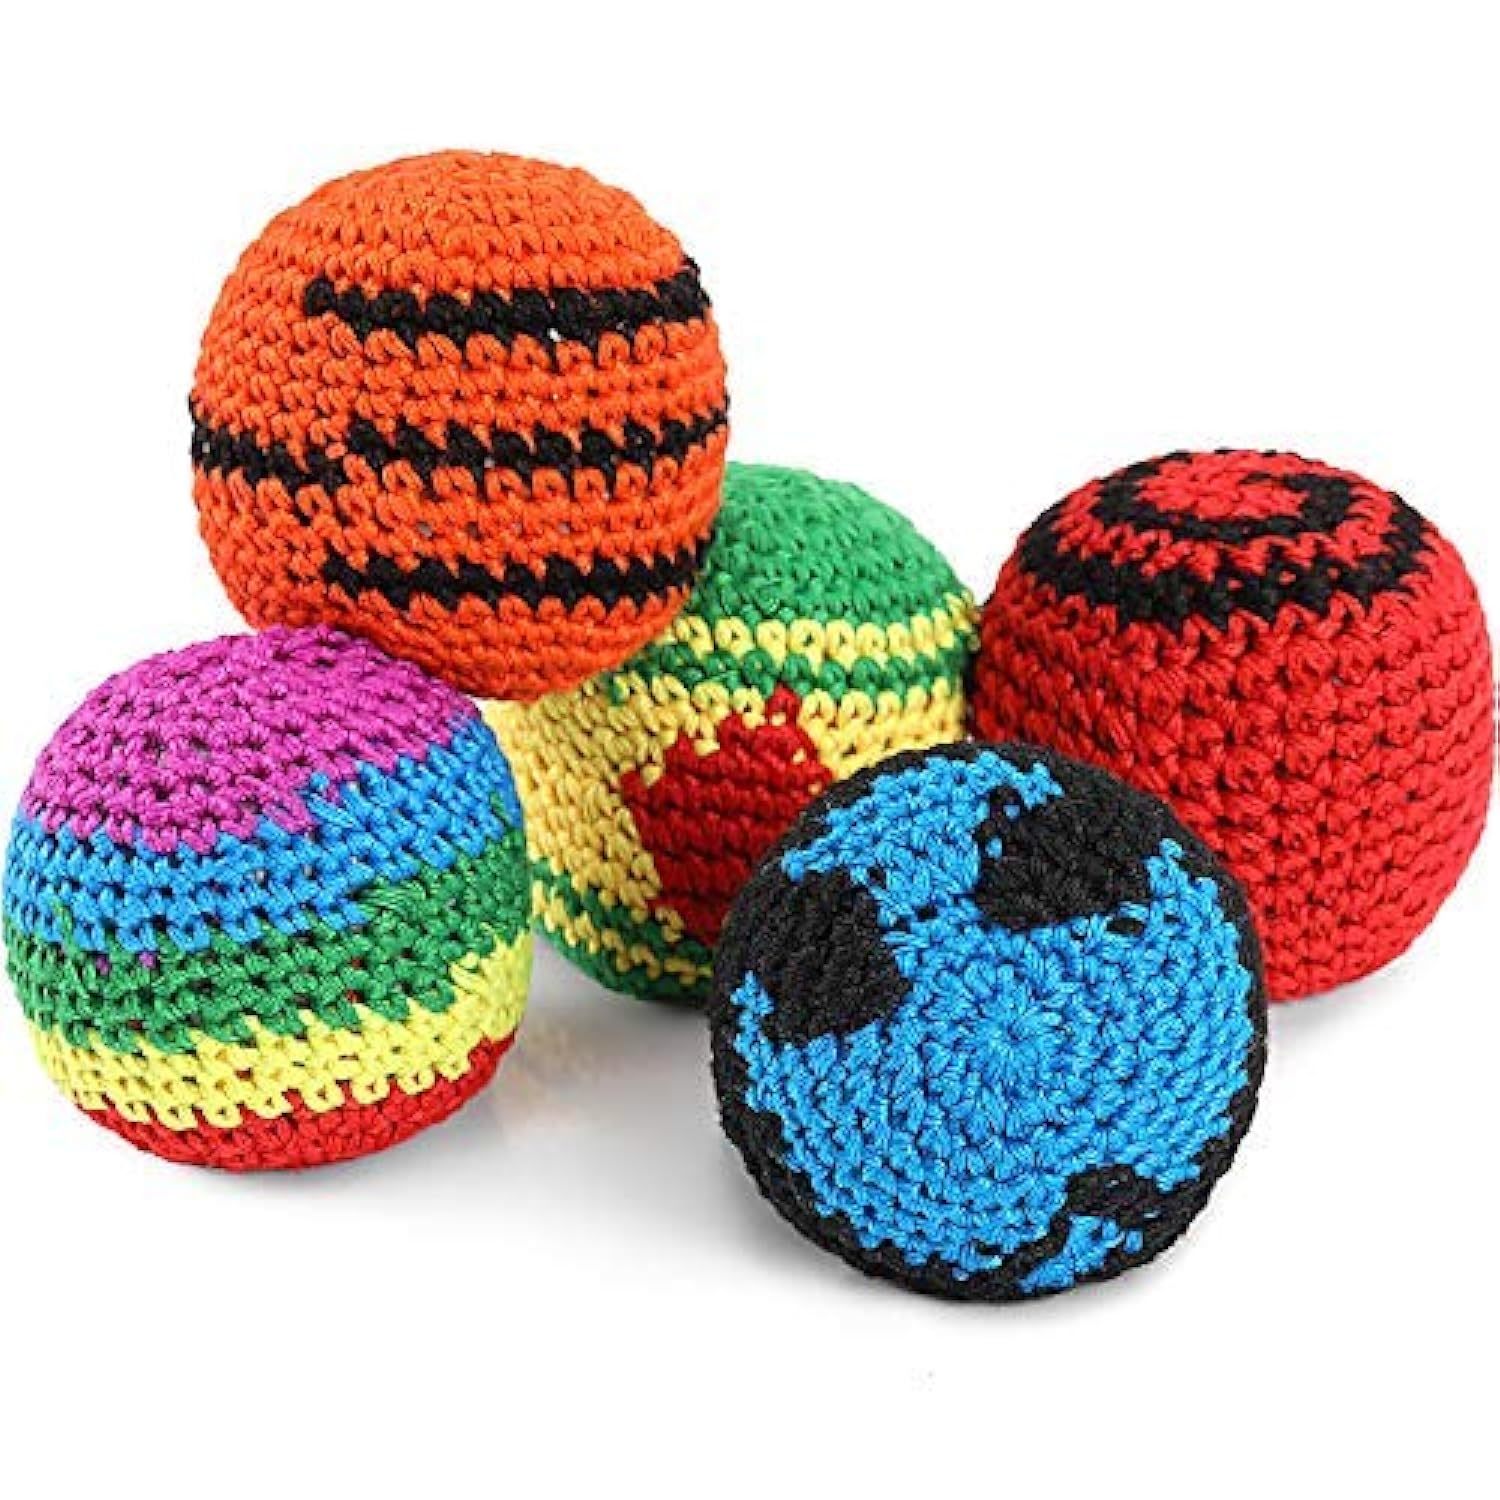 Primary image for 5 Pieces Funny Hacky Ball Sacks Assoerted Colors Woven Kickball Soft Knitted Kic